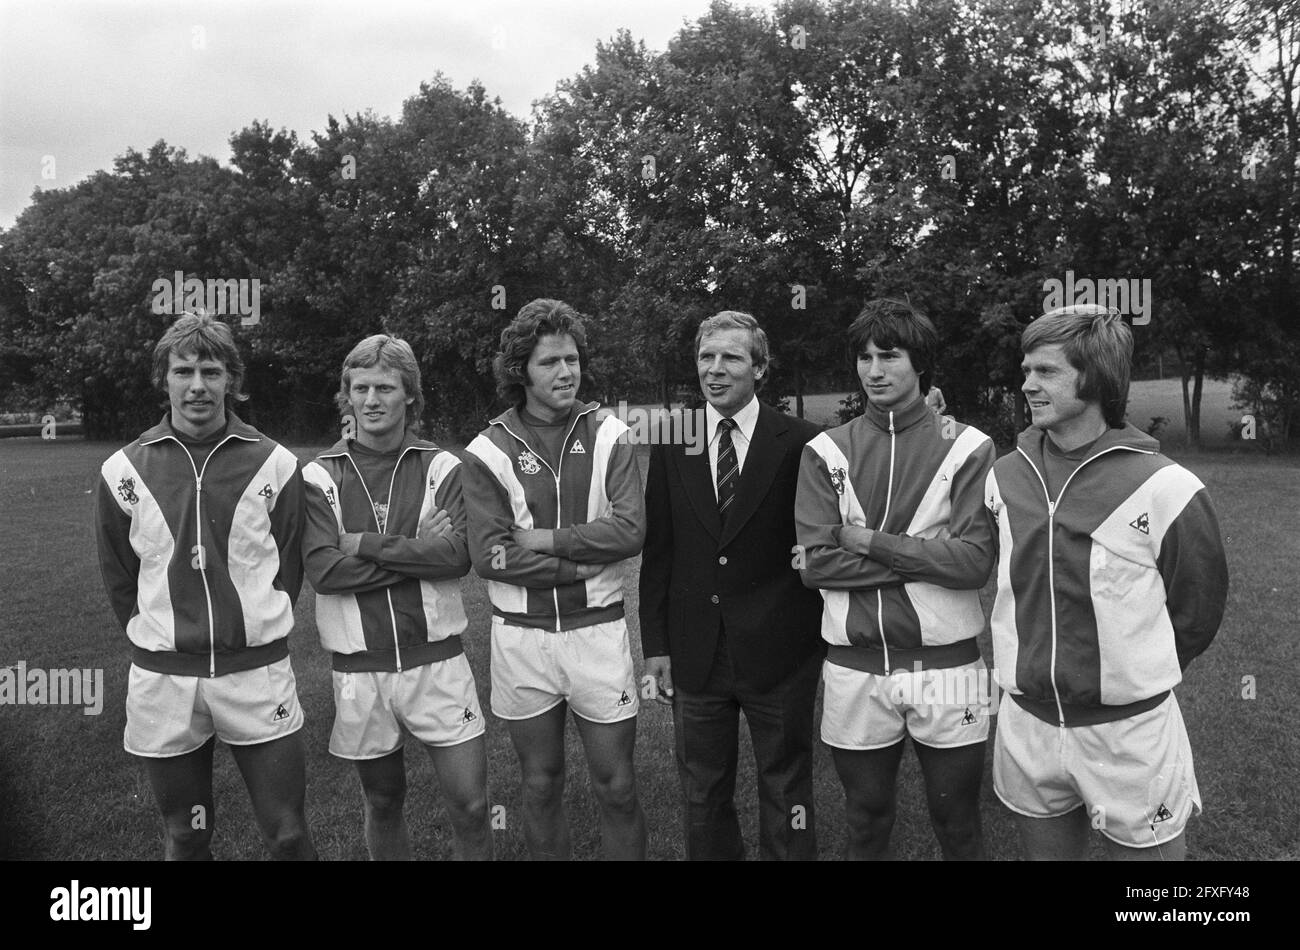 From left to right: Wickel, Helling, Meijer, manager Kraay, Ling and Seeghers, July 15, 1975, sports, soccer, The Netherlands, 20th century press agency photo, news to remember, documentary, historic photography 1945-1990, visual stories, human history of the Twentieth Century, capturing moments in time Stock Photo